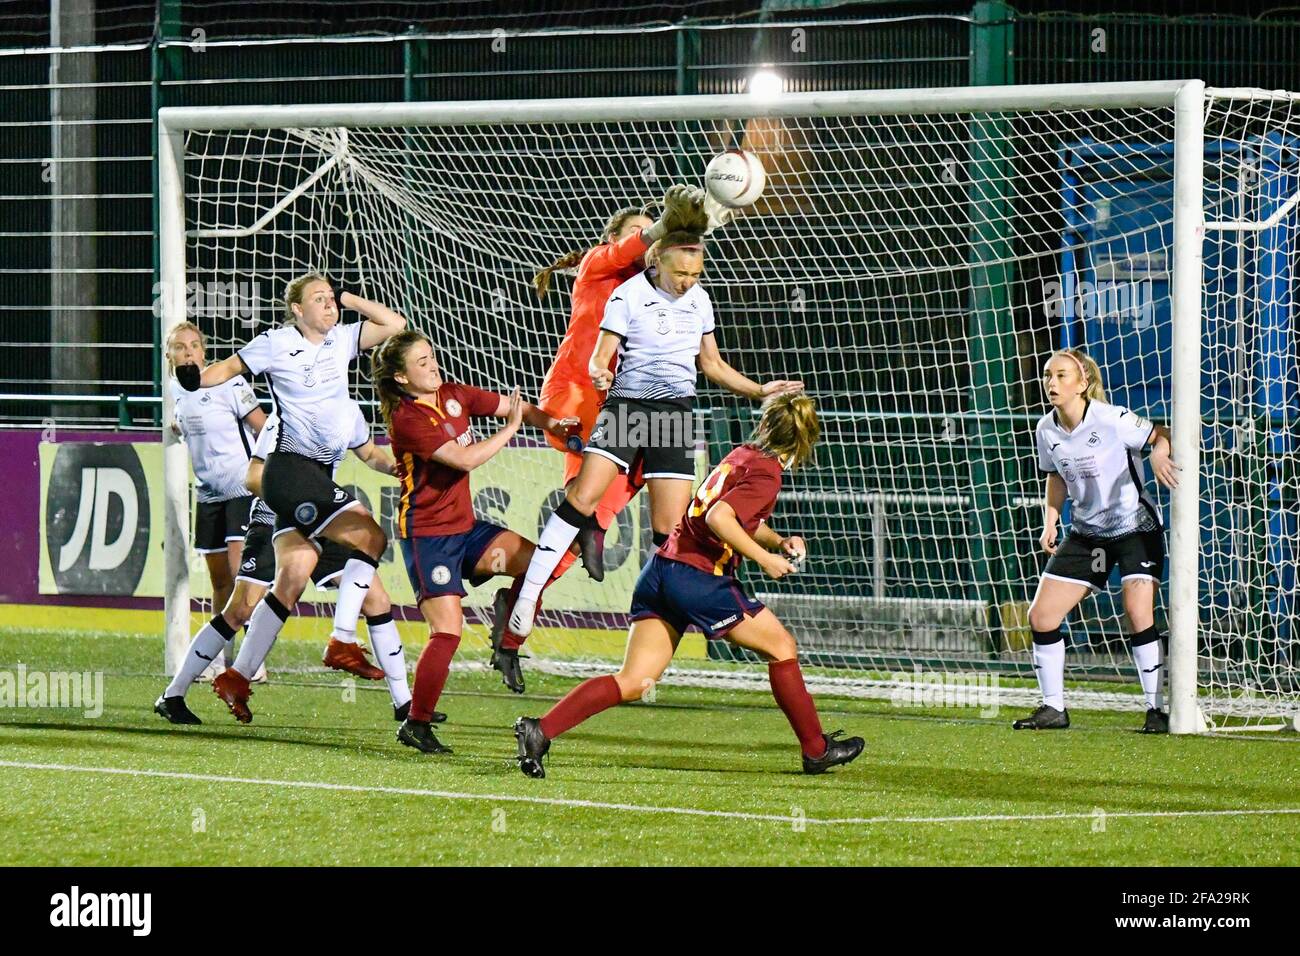 Cardiff, UK. 21st Apr, 2021. Claire Skinner of Swansea City Ladies punches the ball away during the Welsh Premier Women's League match between Cardiff Met Women and Swansea City Ladies at the Cyncoed Campus in Cardiff, Wales, UK on 21, April 2021. Credit: Duncan Thomas/Majestic Media/Alamy Live News. Stock Photo